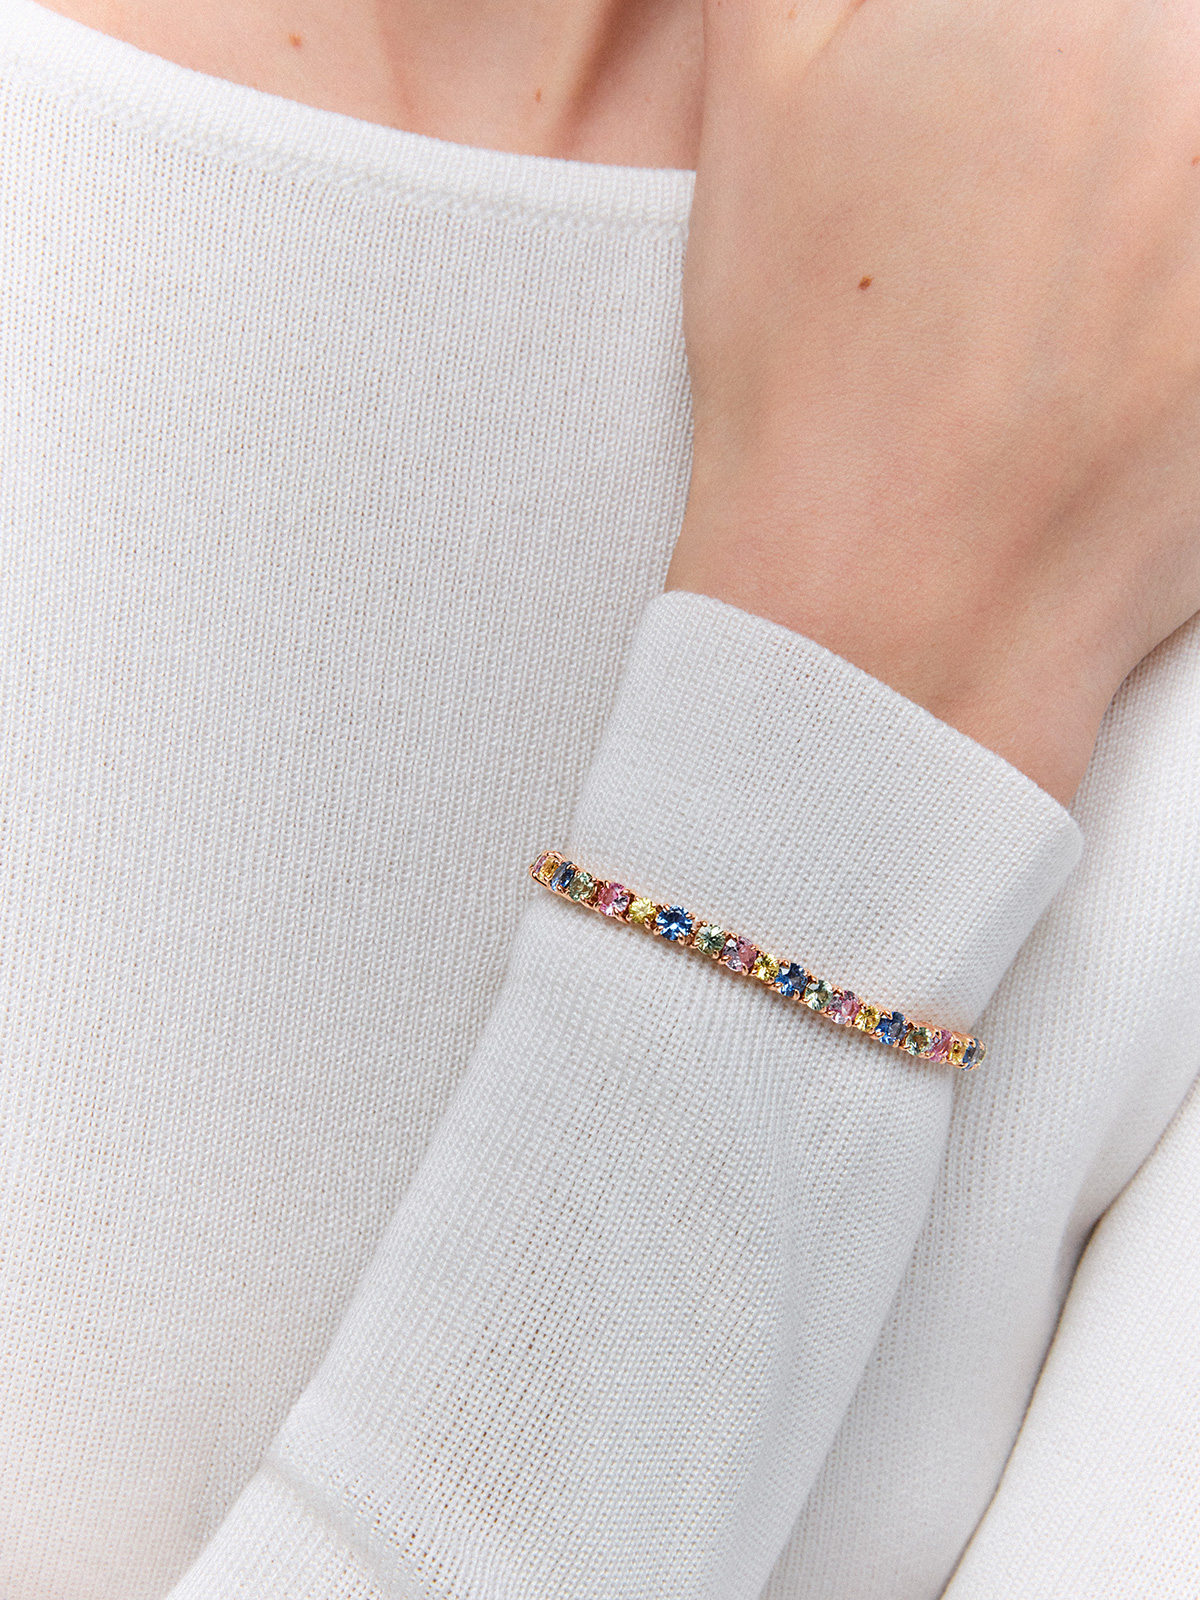 18K Rose Gold Riviere Bracelet with Multicolored Sapphire